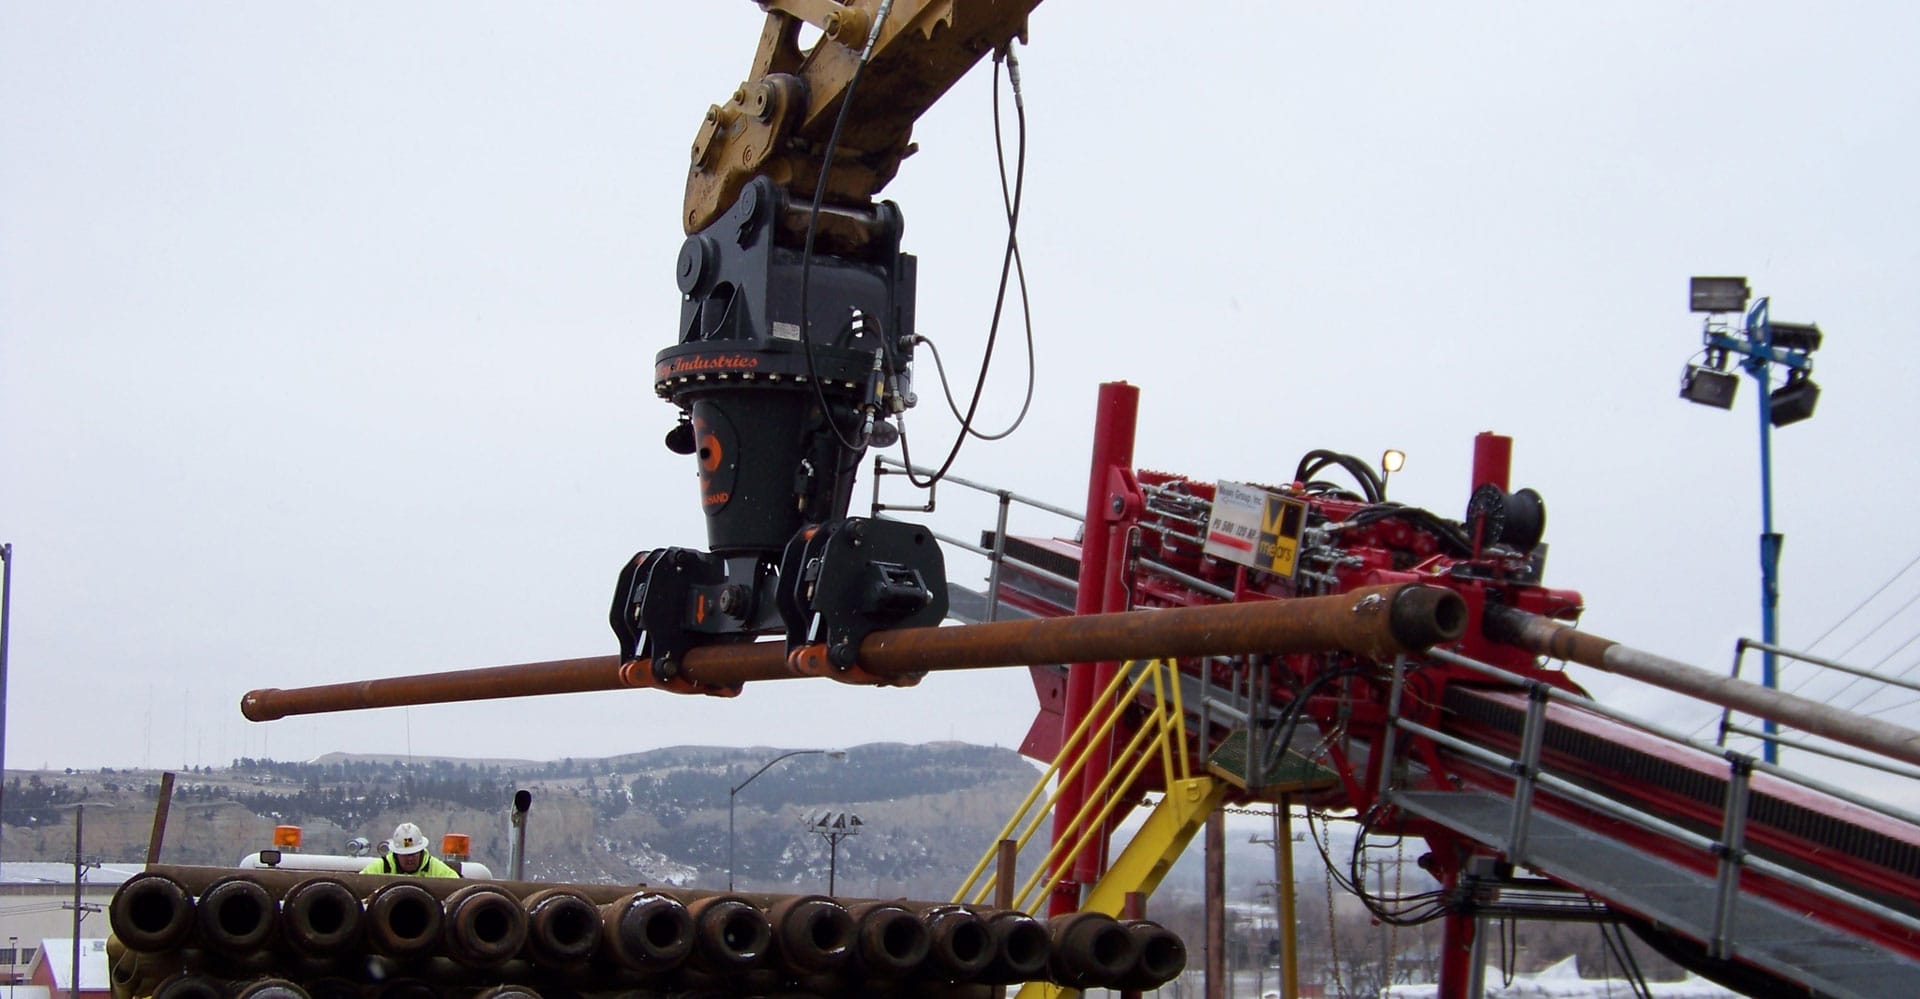 The DECKHAND® system in action! In this image a DECKHAND® is attached to an excavator. Outfitted with Directional Drilling Arms, the DECKHAND® makes quick work of handling drill rod around a job site.